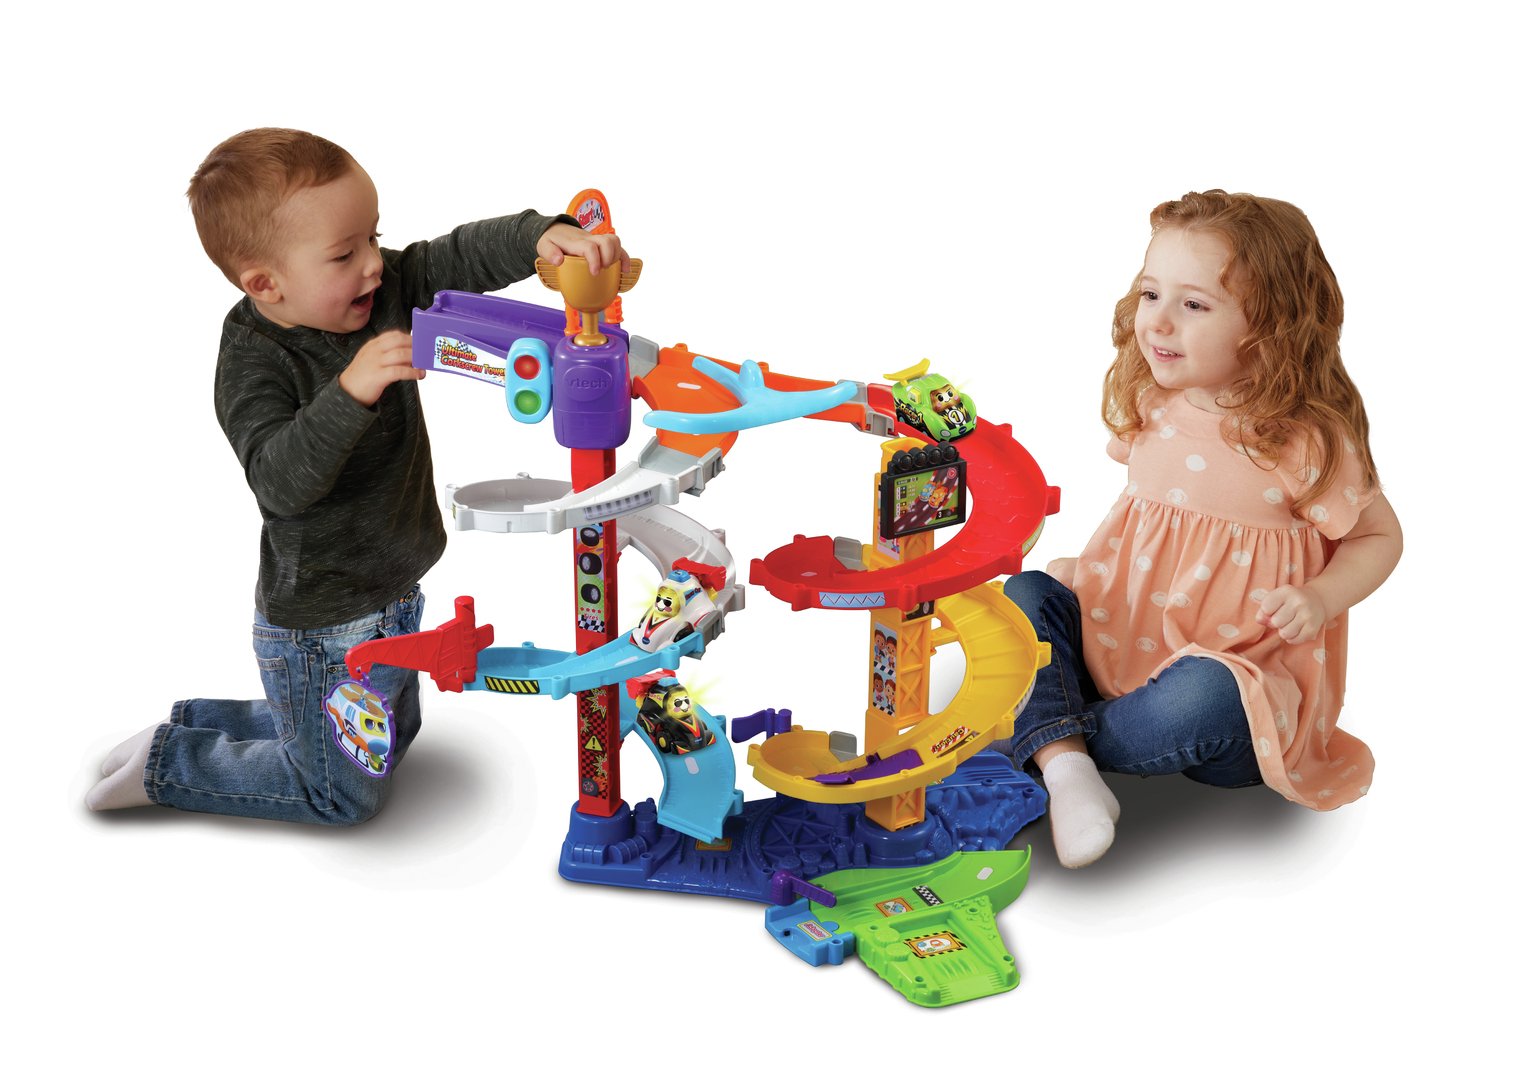 VTech Toot-Toot Drivers Tower Playset Review